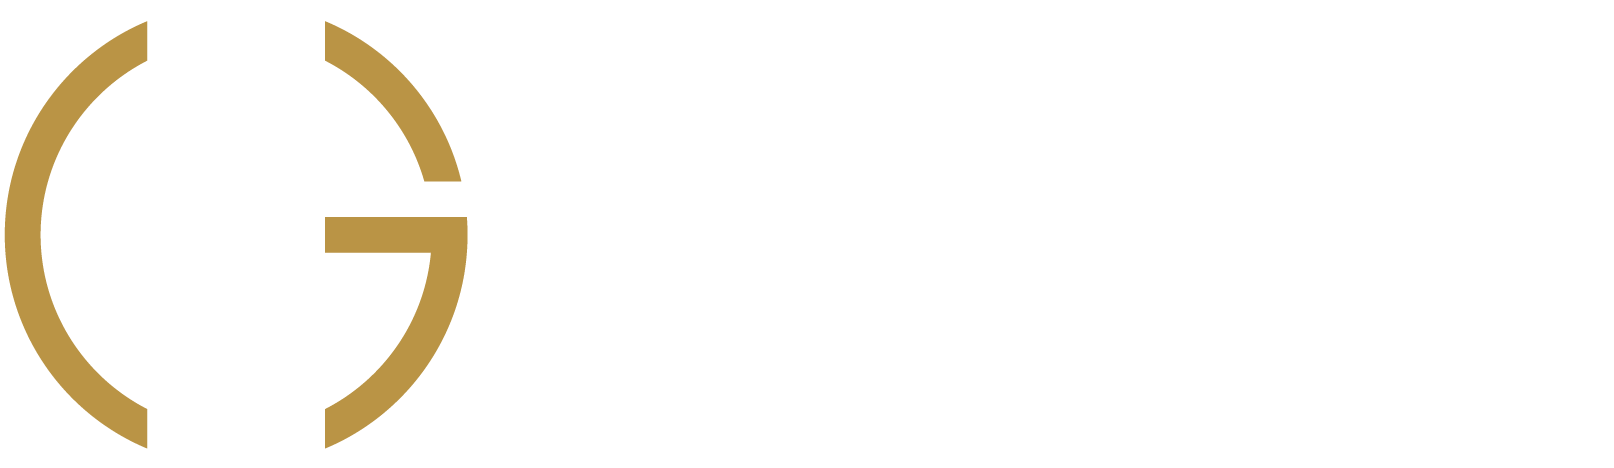 Gooder Career Connections Logo